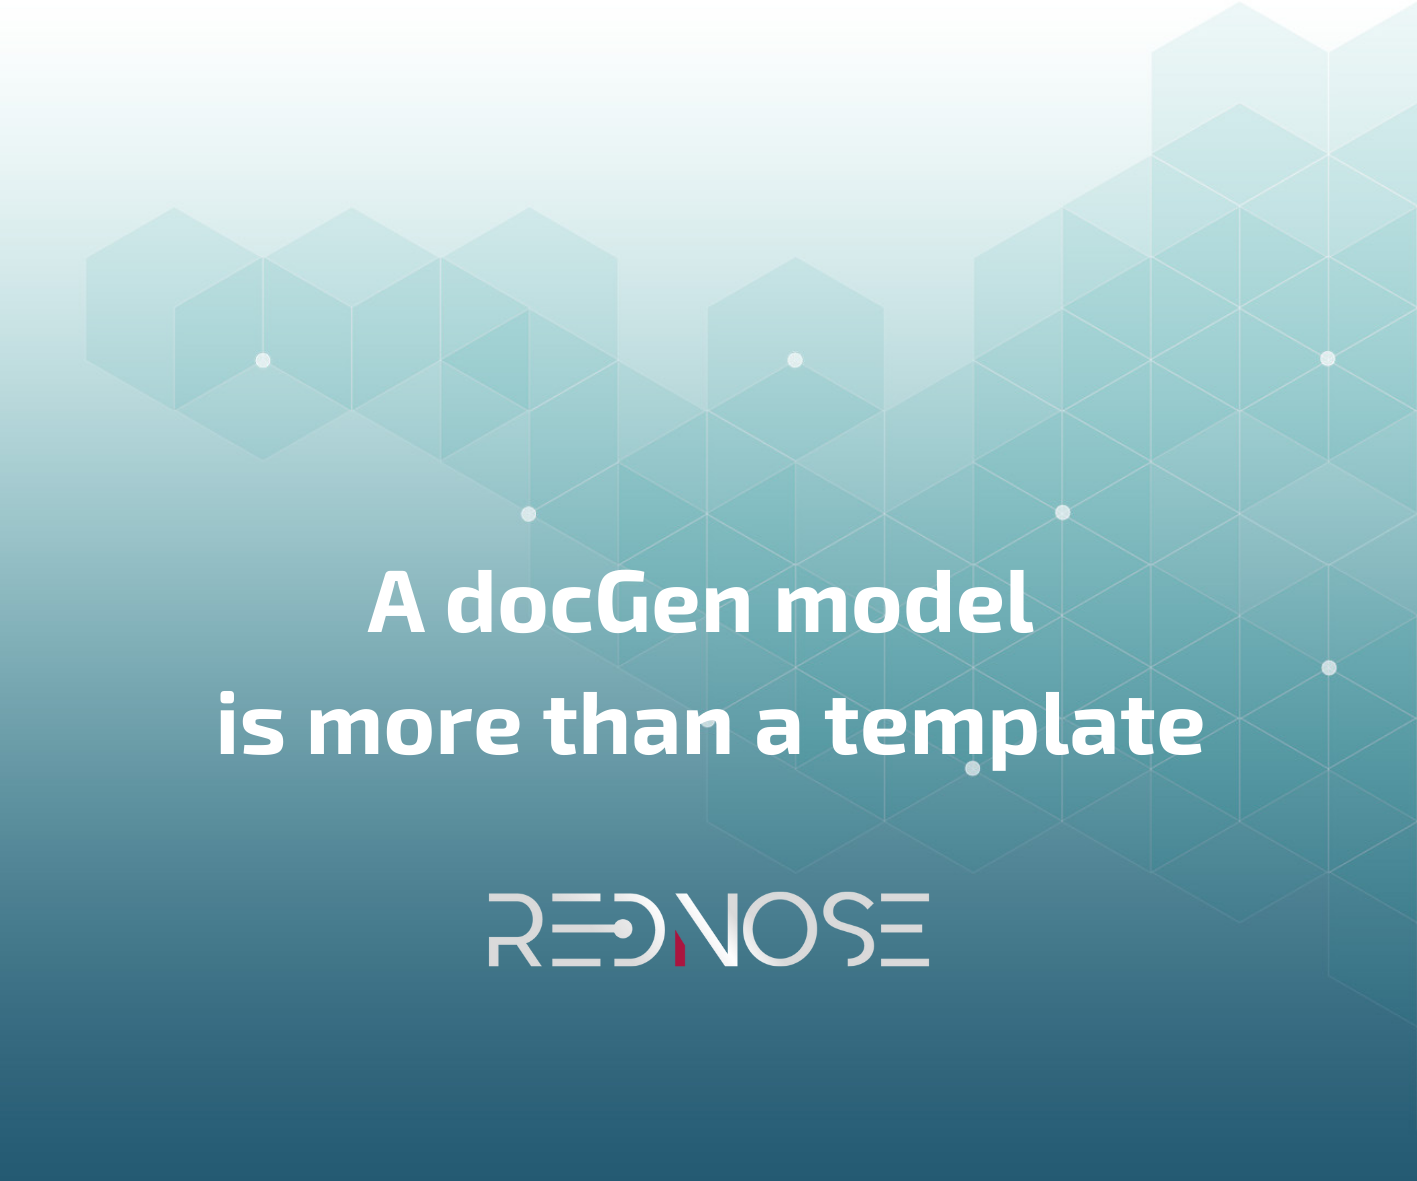 A docGen model is more than a template